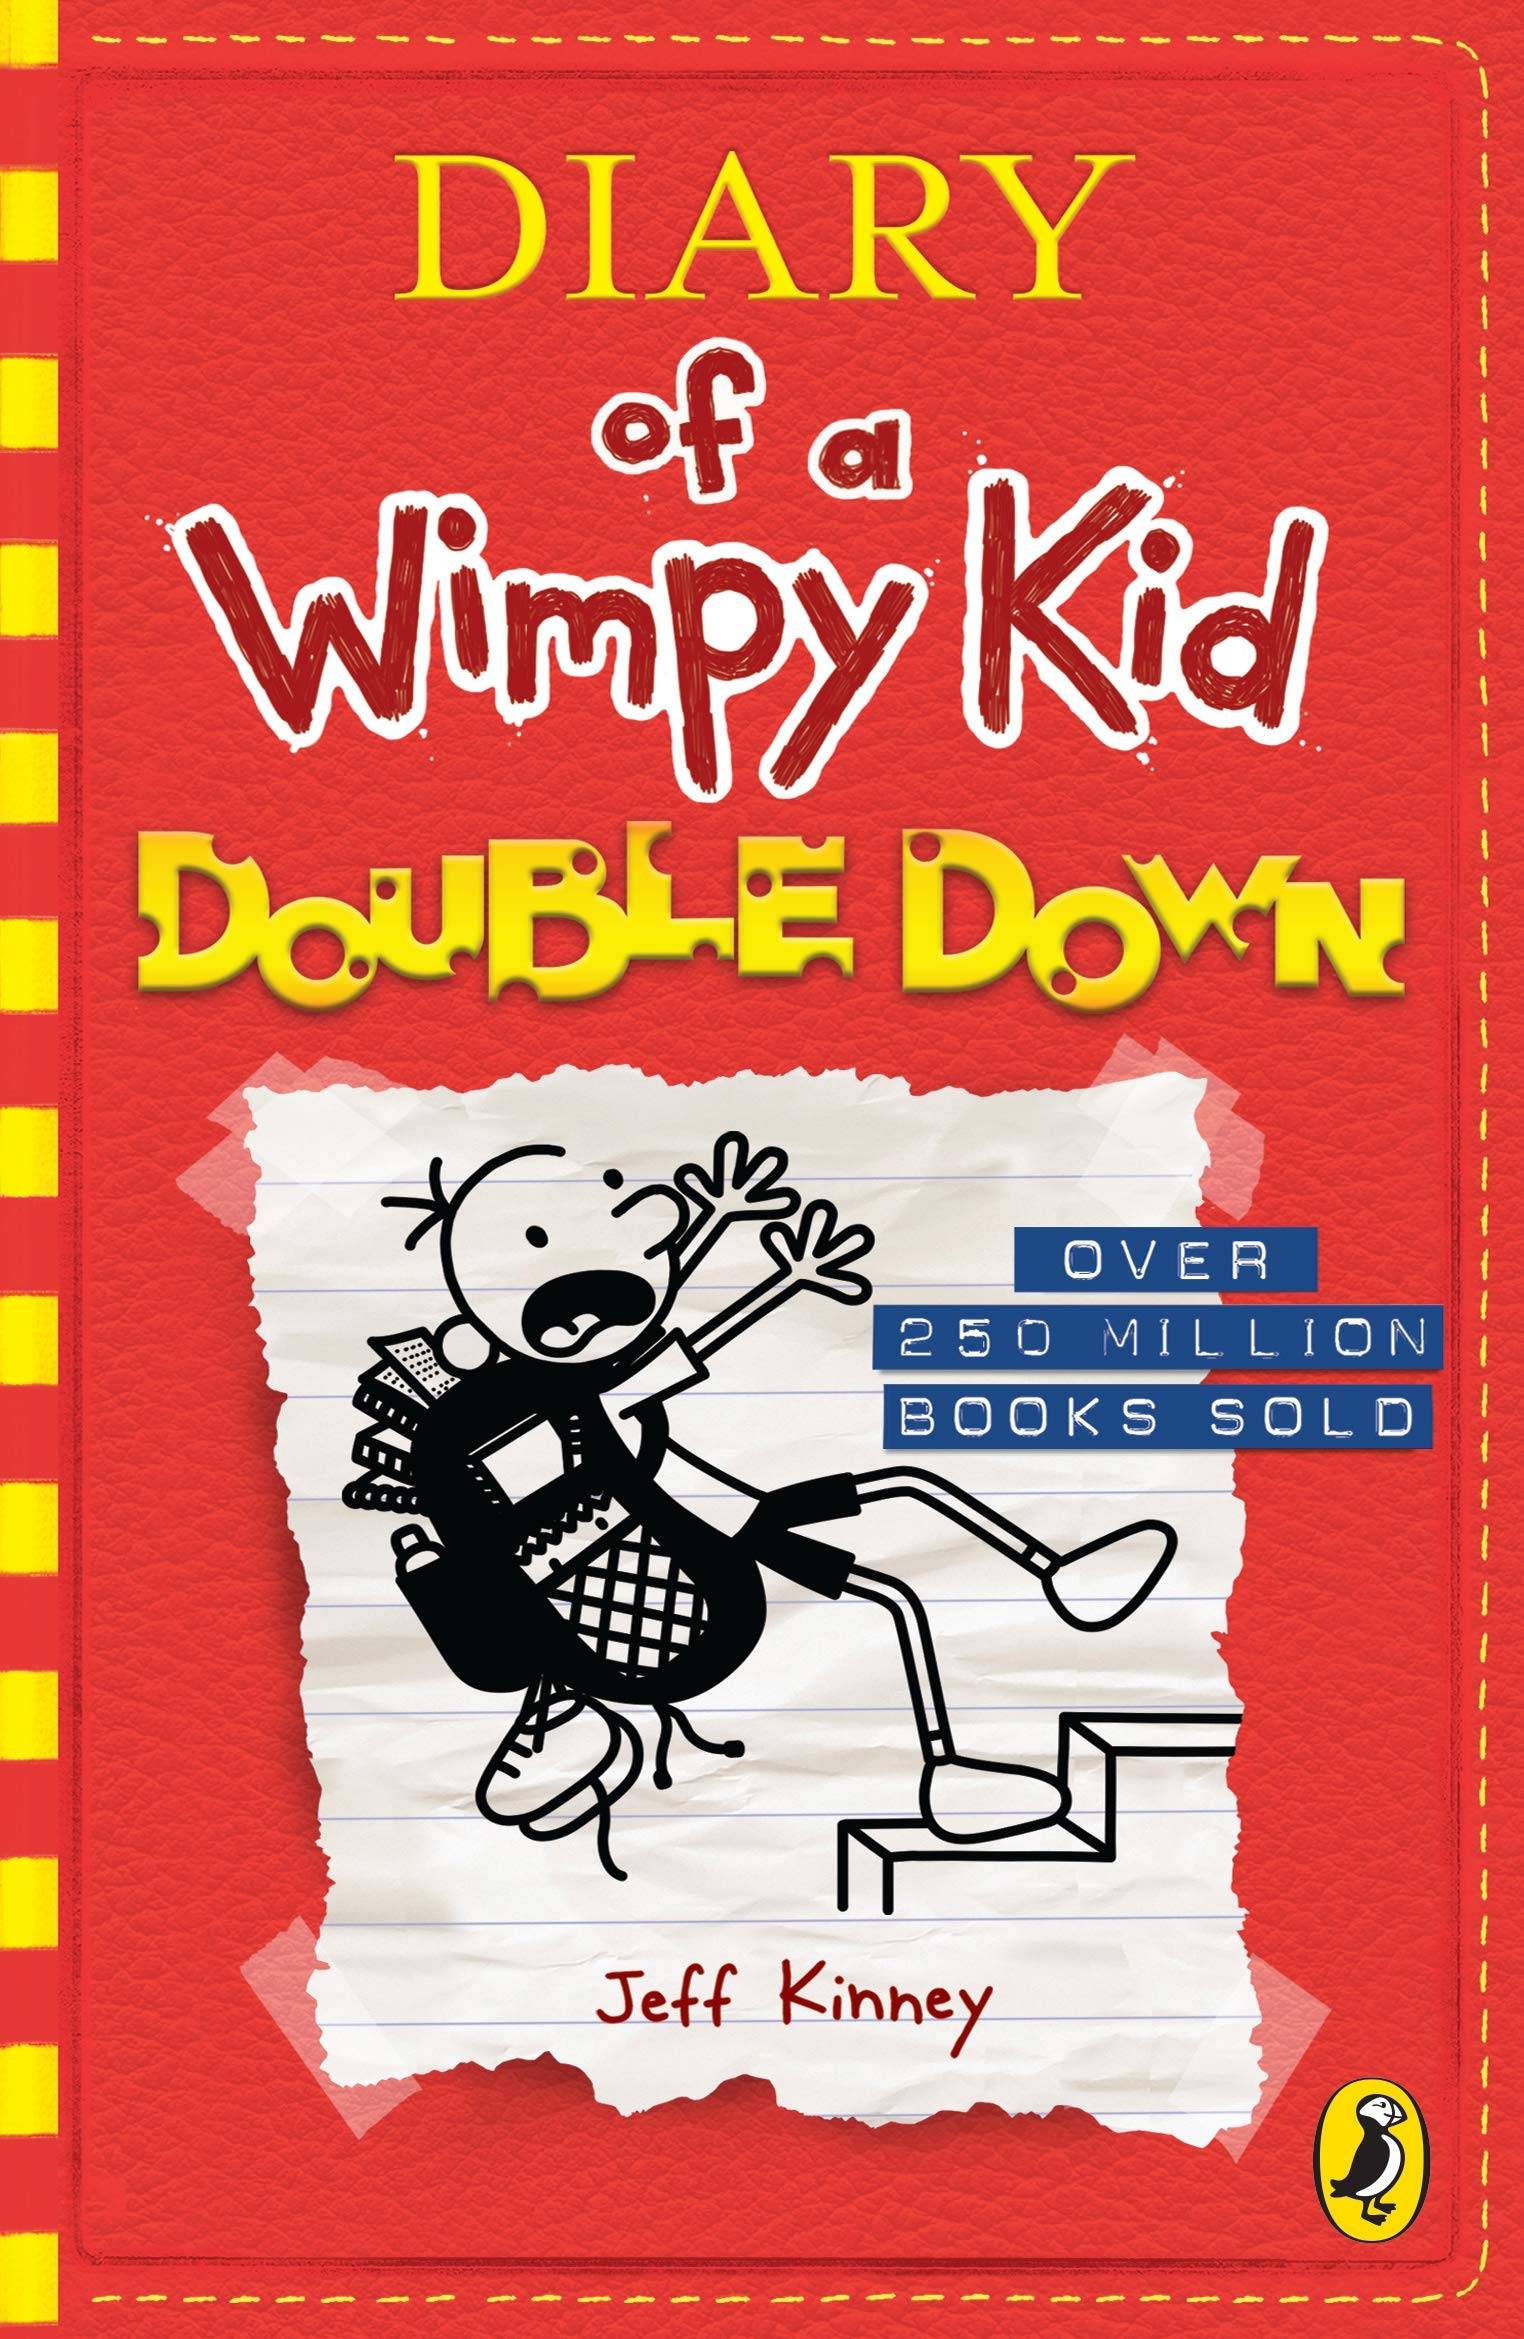 IMG : Wimpy kid- Double down